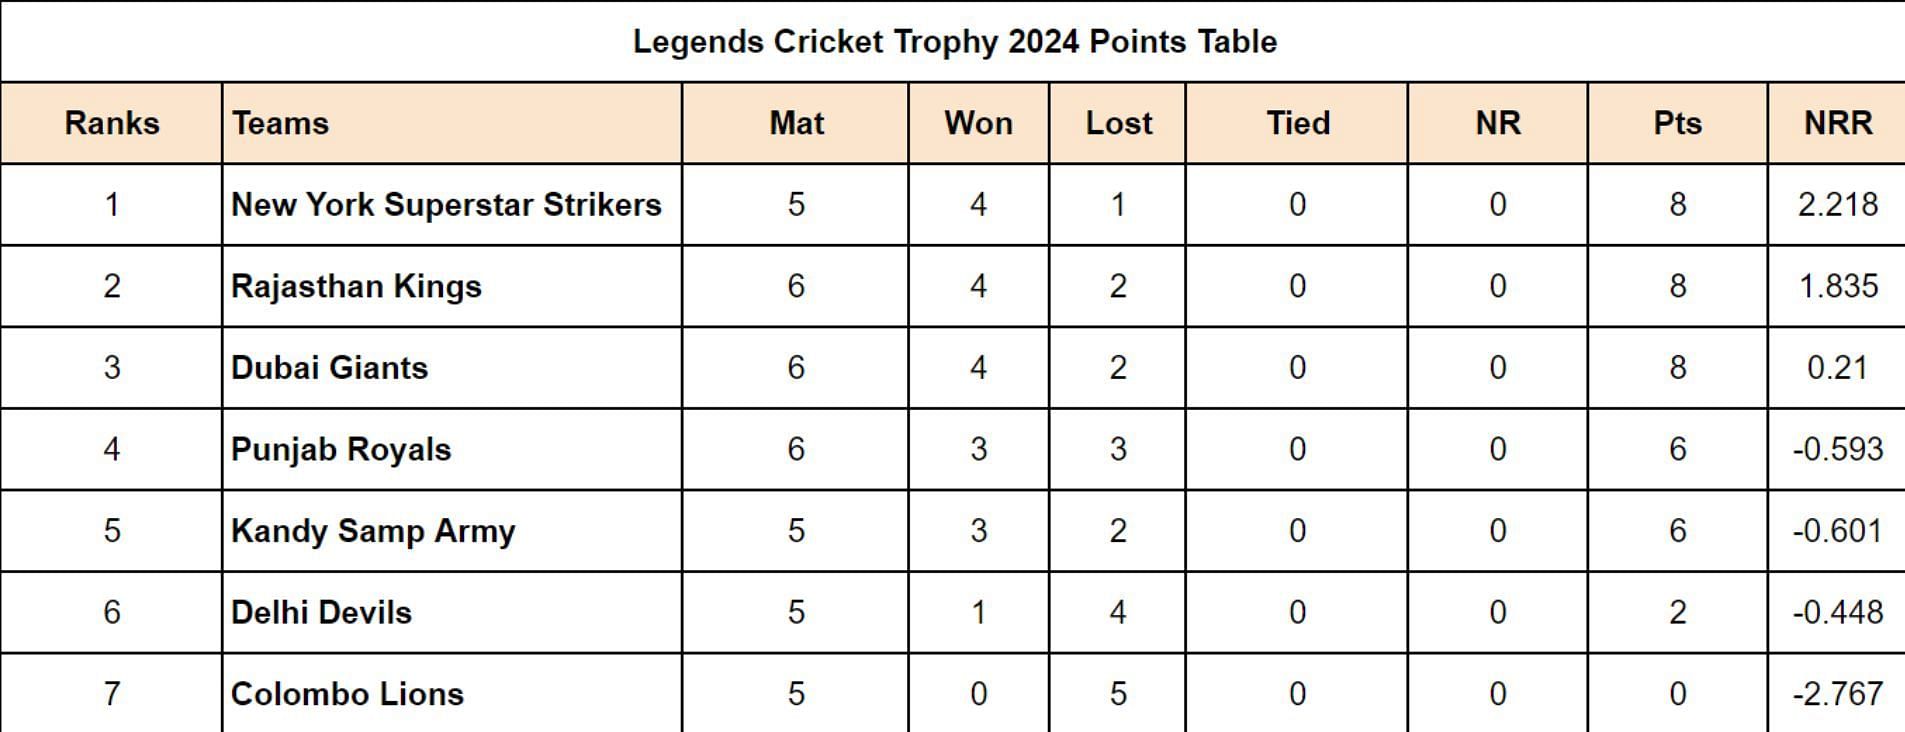 Legends Cricket Trophy 2024 Points Table Updated after Match 19